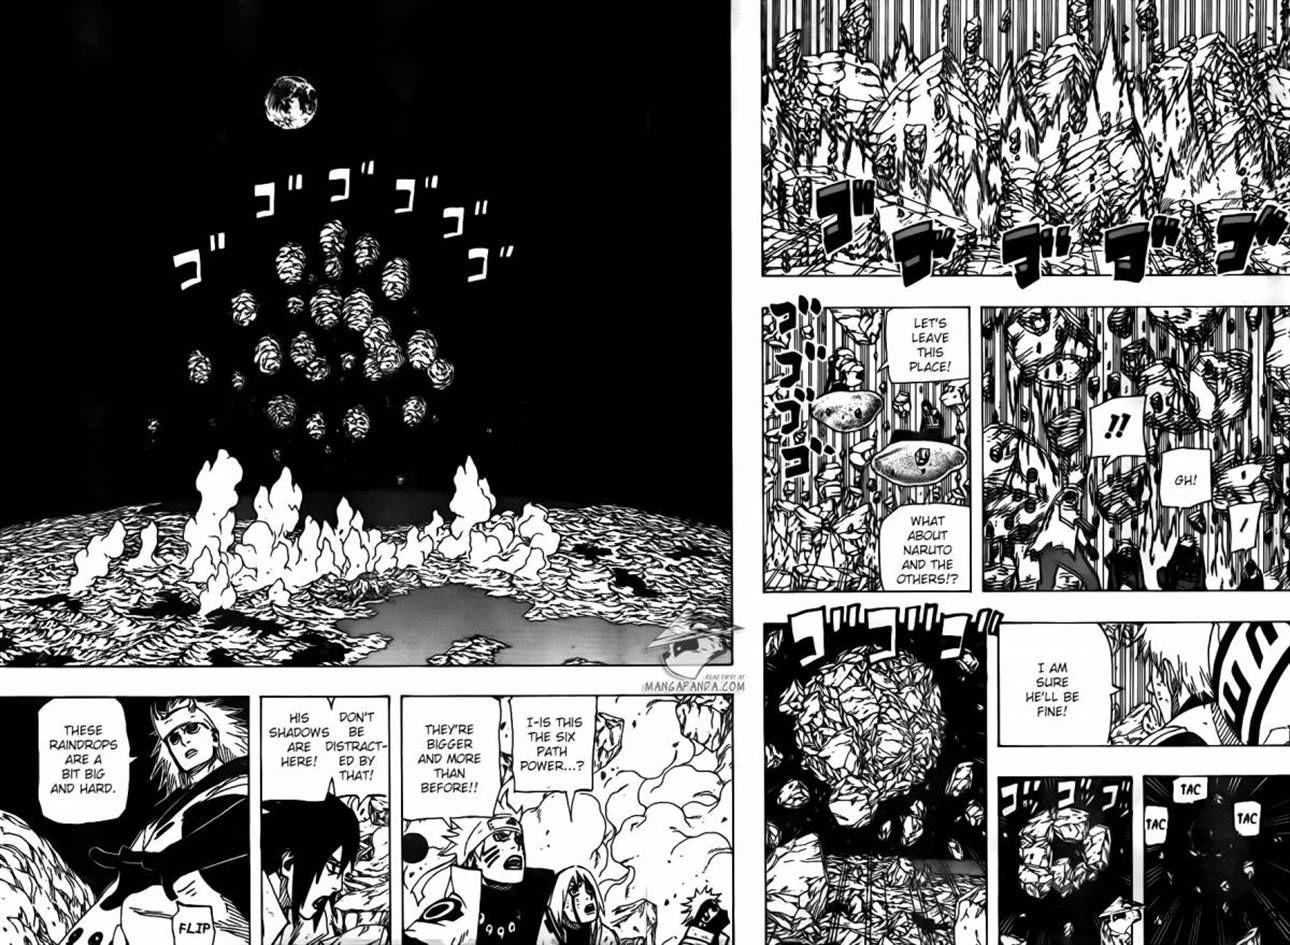 Vol.70 Chapter 676 – The Infinite Dream | 10 page